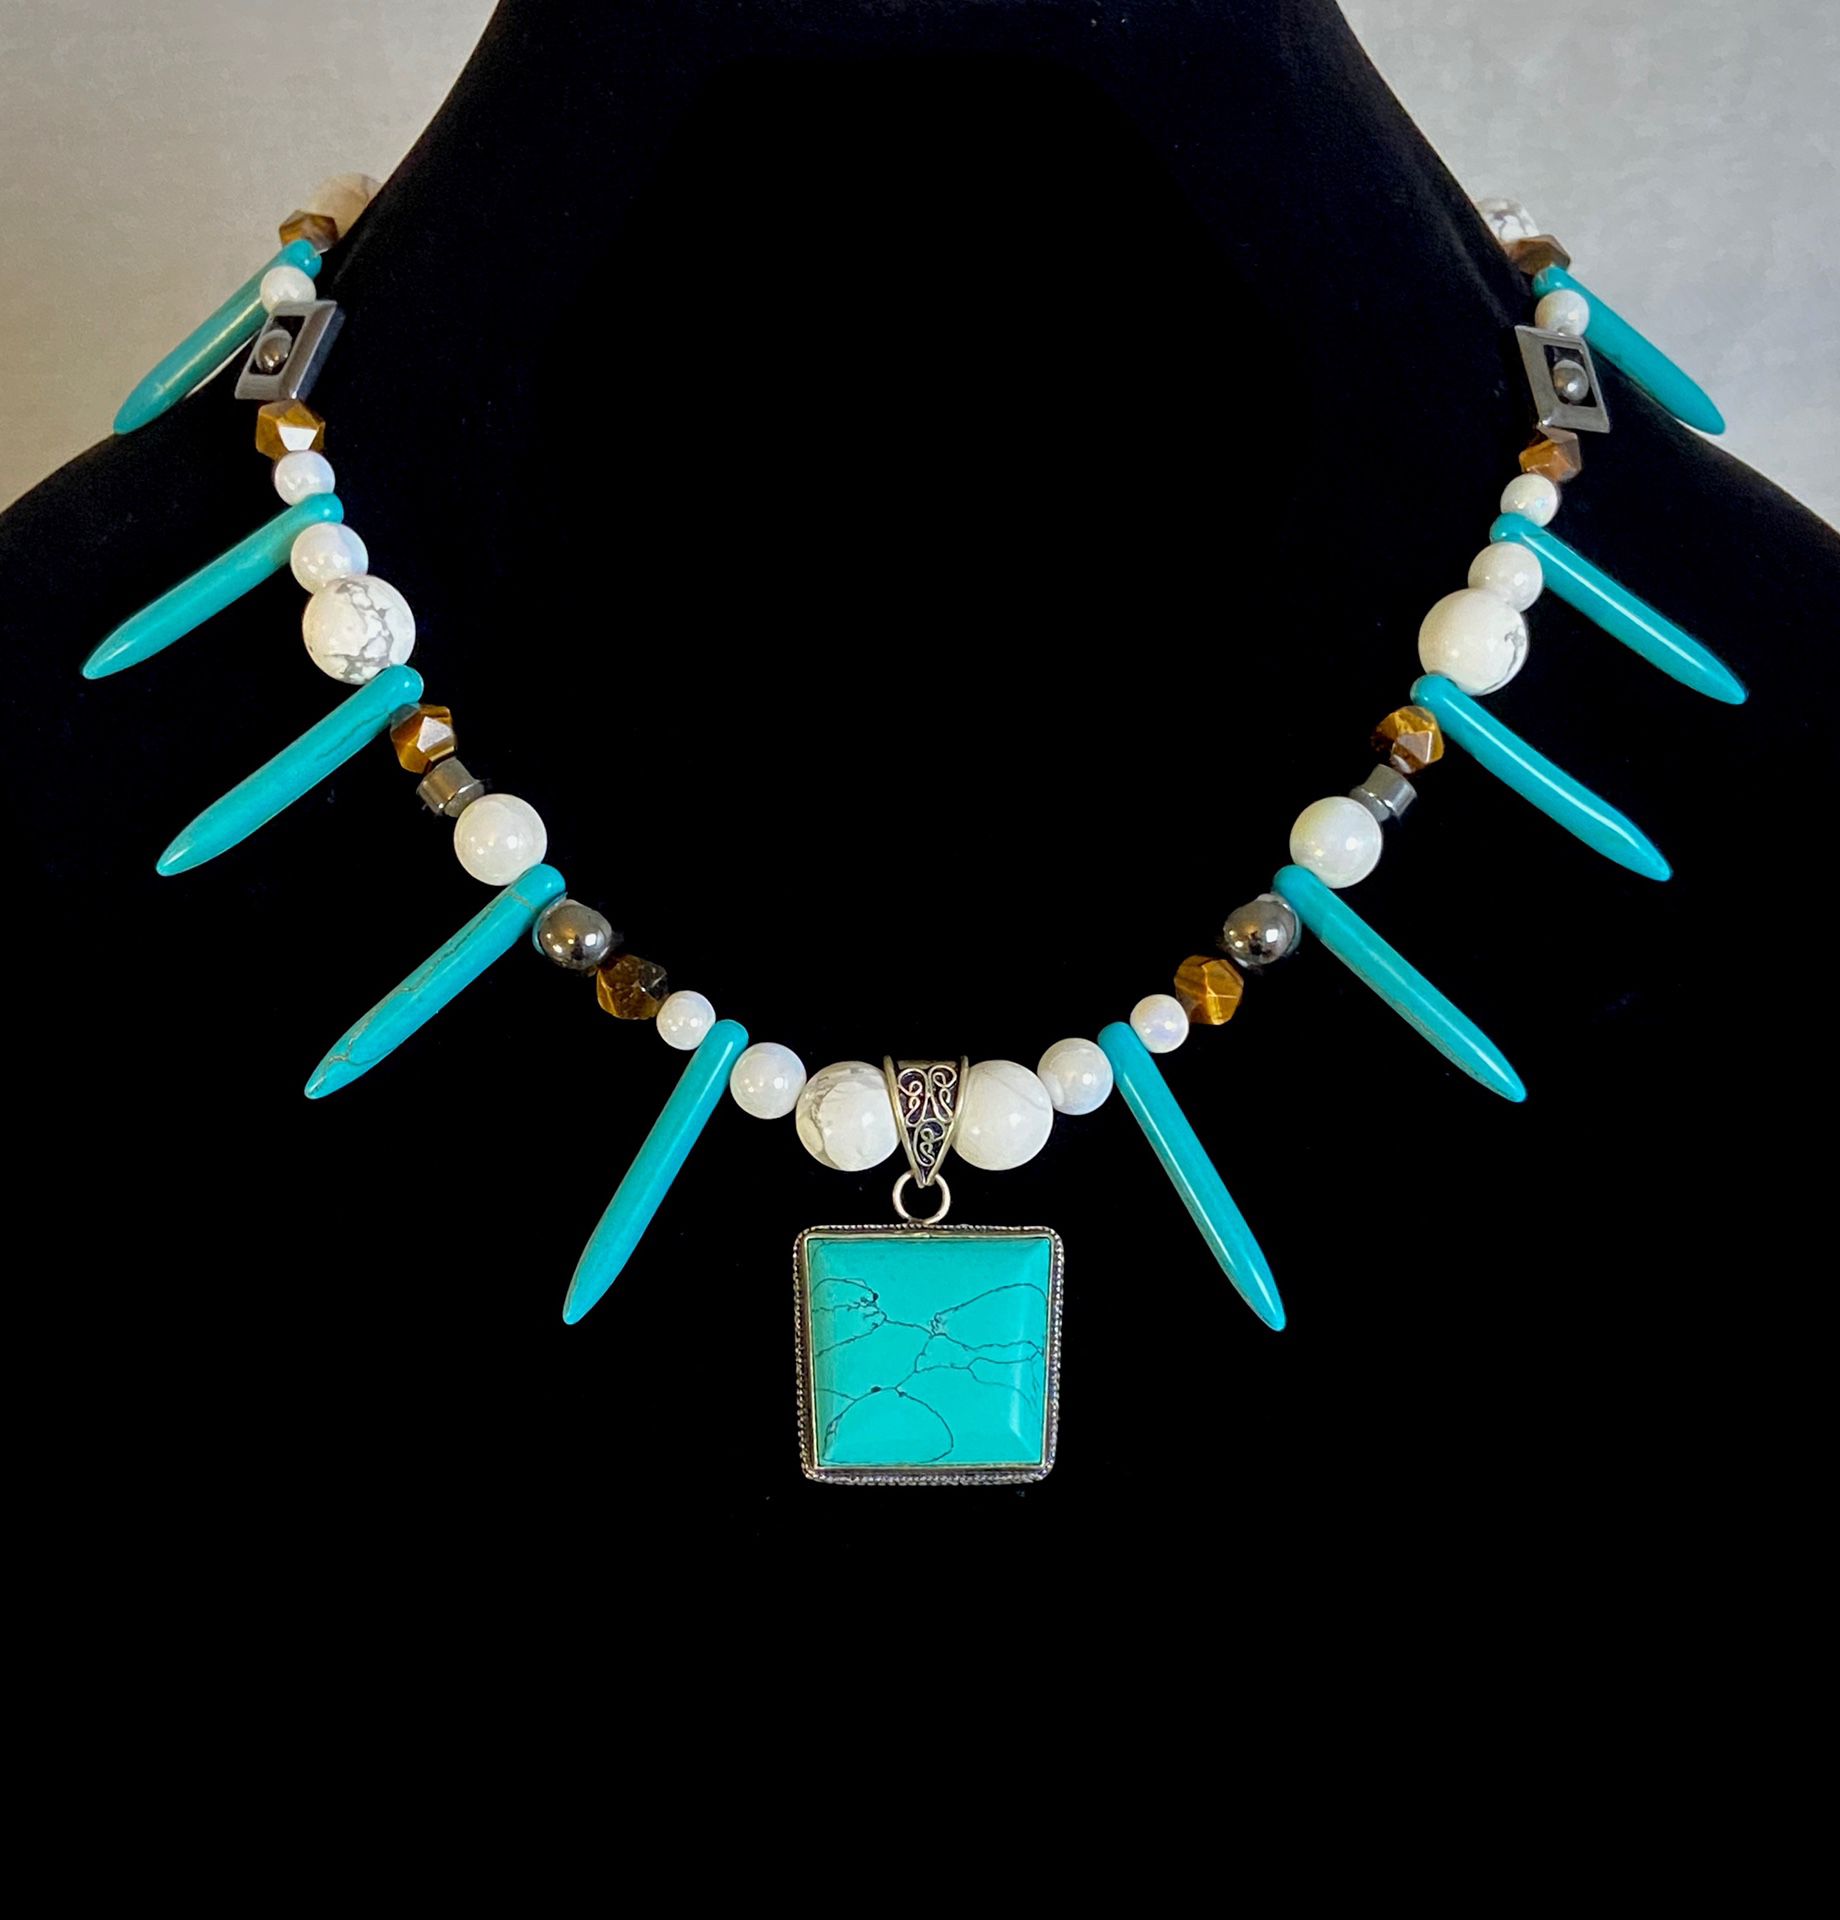 Turquoise Guardian Jewel Necklace